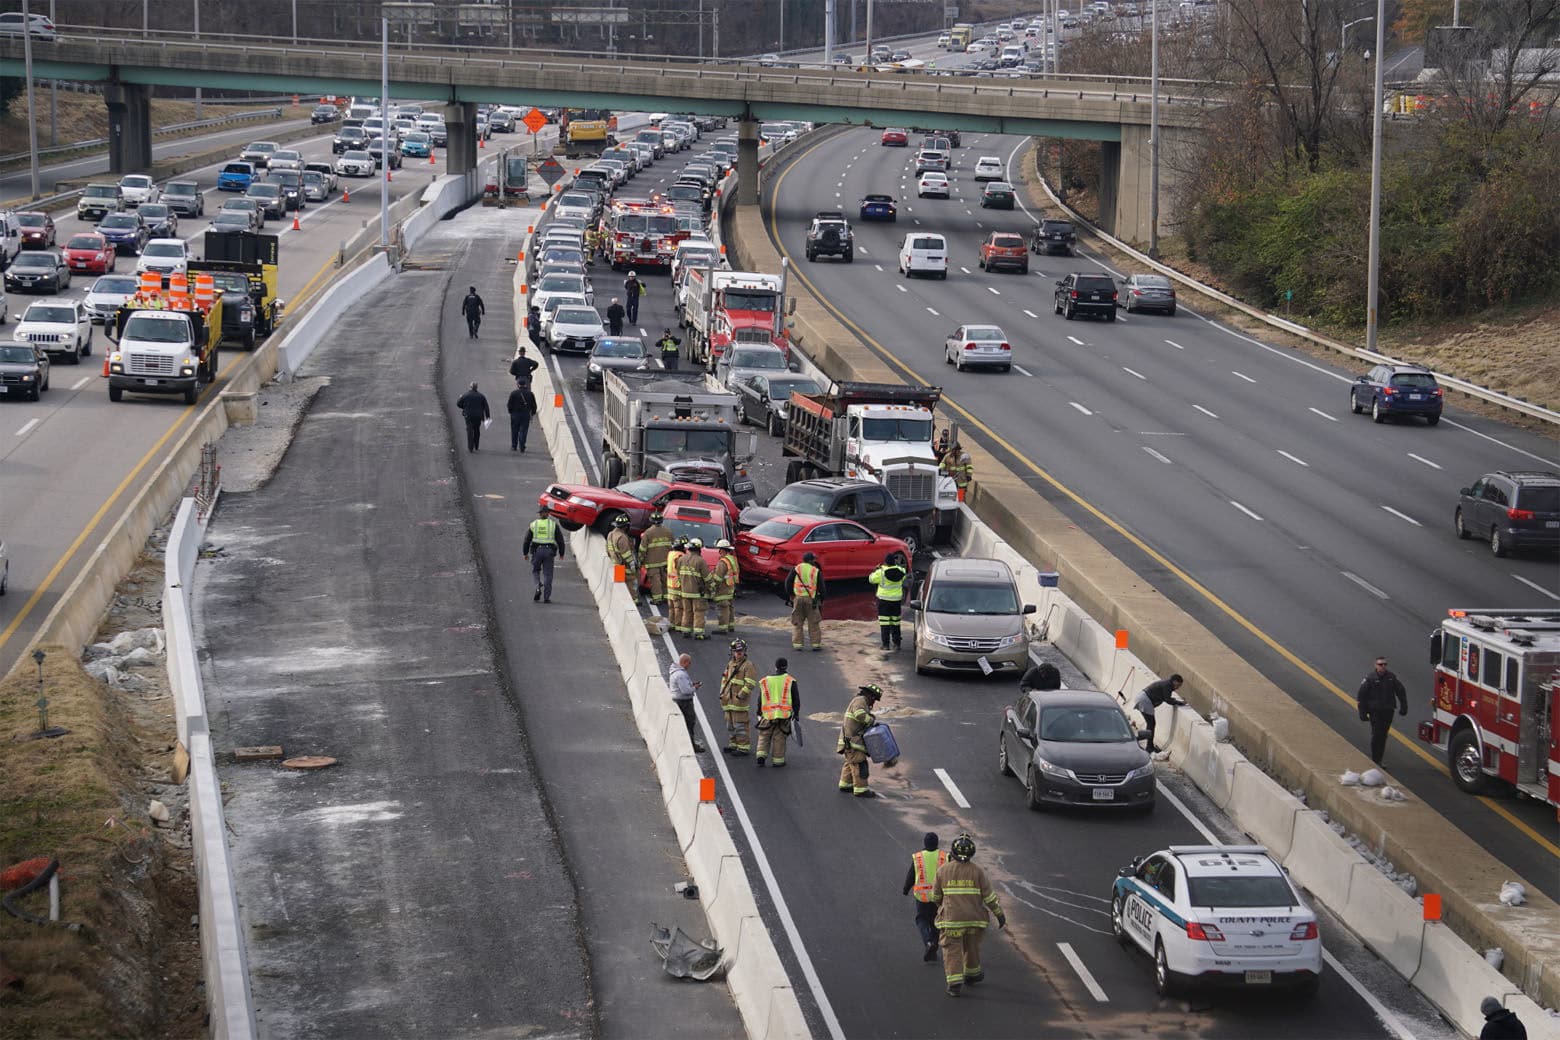 The crash caused backups behind the crash as police worked to divert traffic. (Courtesy Thomas Philibin/Live Wire Media Relations)